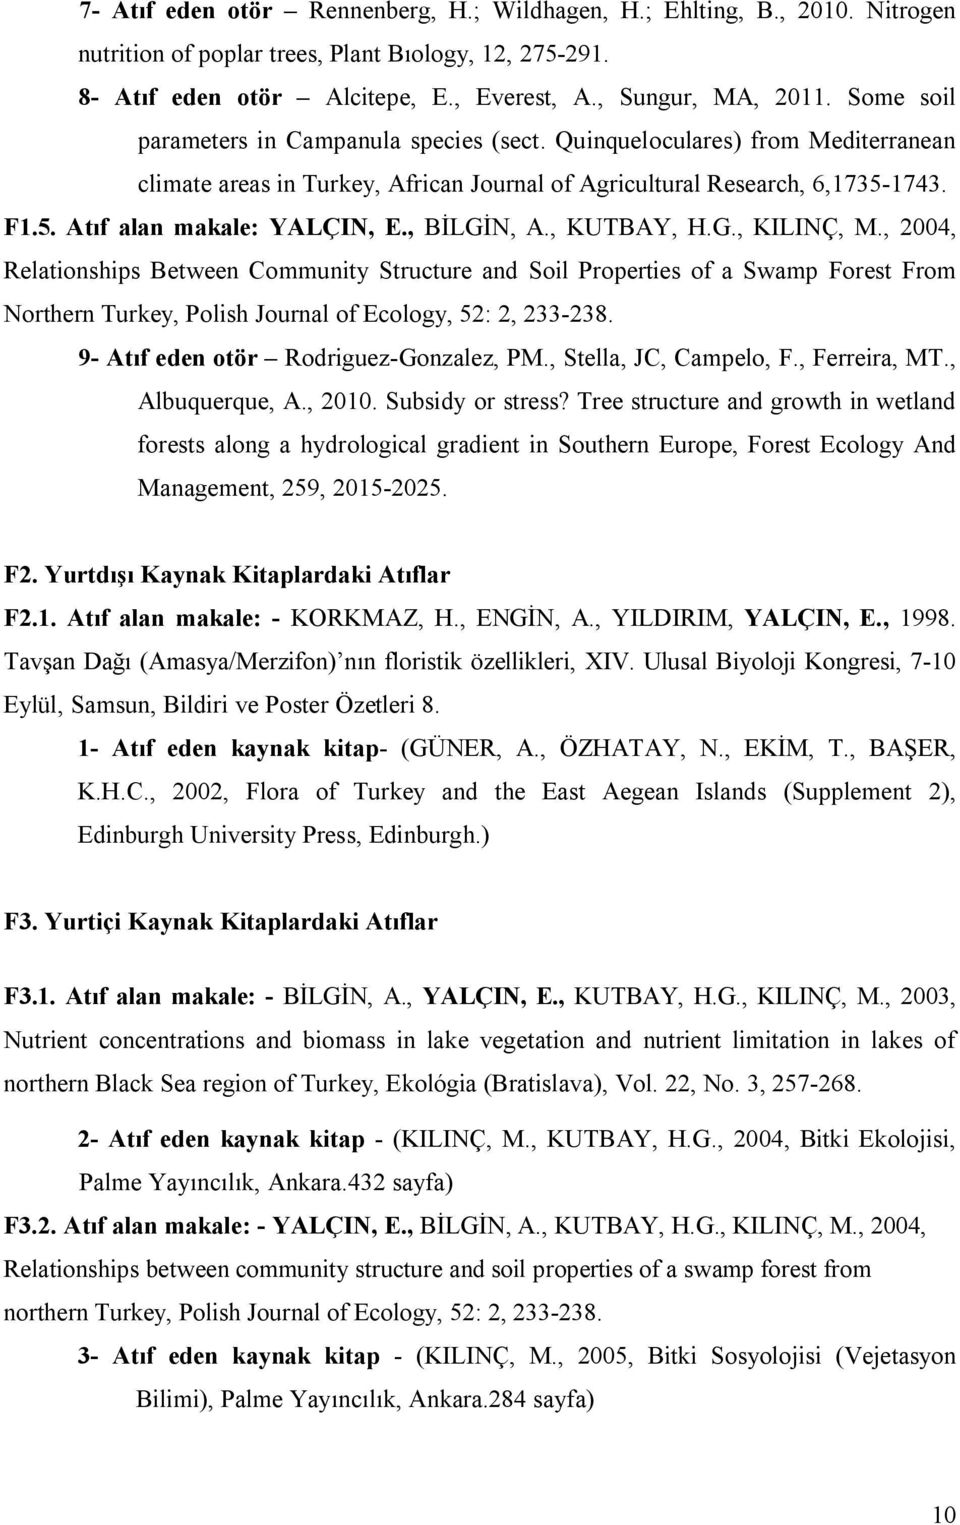 , BİLGİN, A., KUTBAY, H.G., KILINÇ, M., 2004, Relationships Between Community Structure and Soil Properties of a Swamp Forest From Northern Turkey, Polish Journal of Ecology, 52: 2, 233-238.